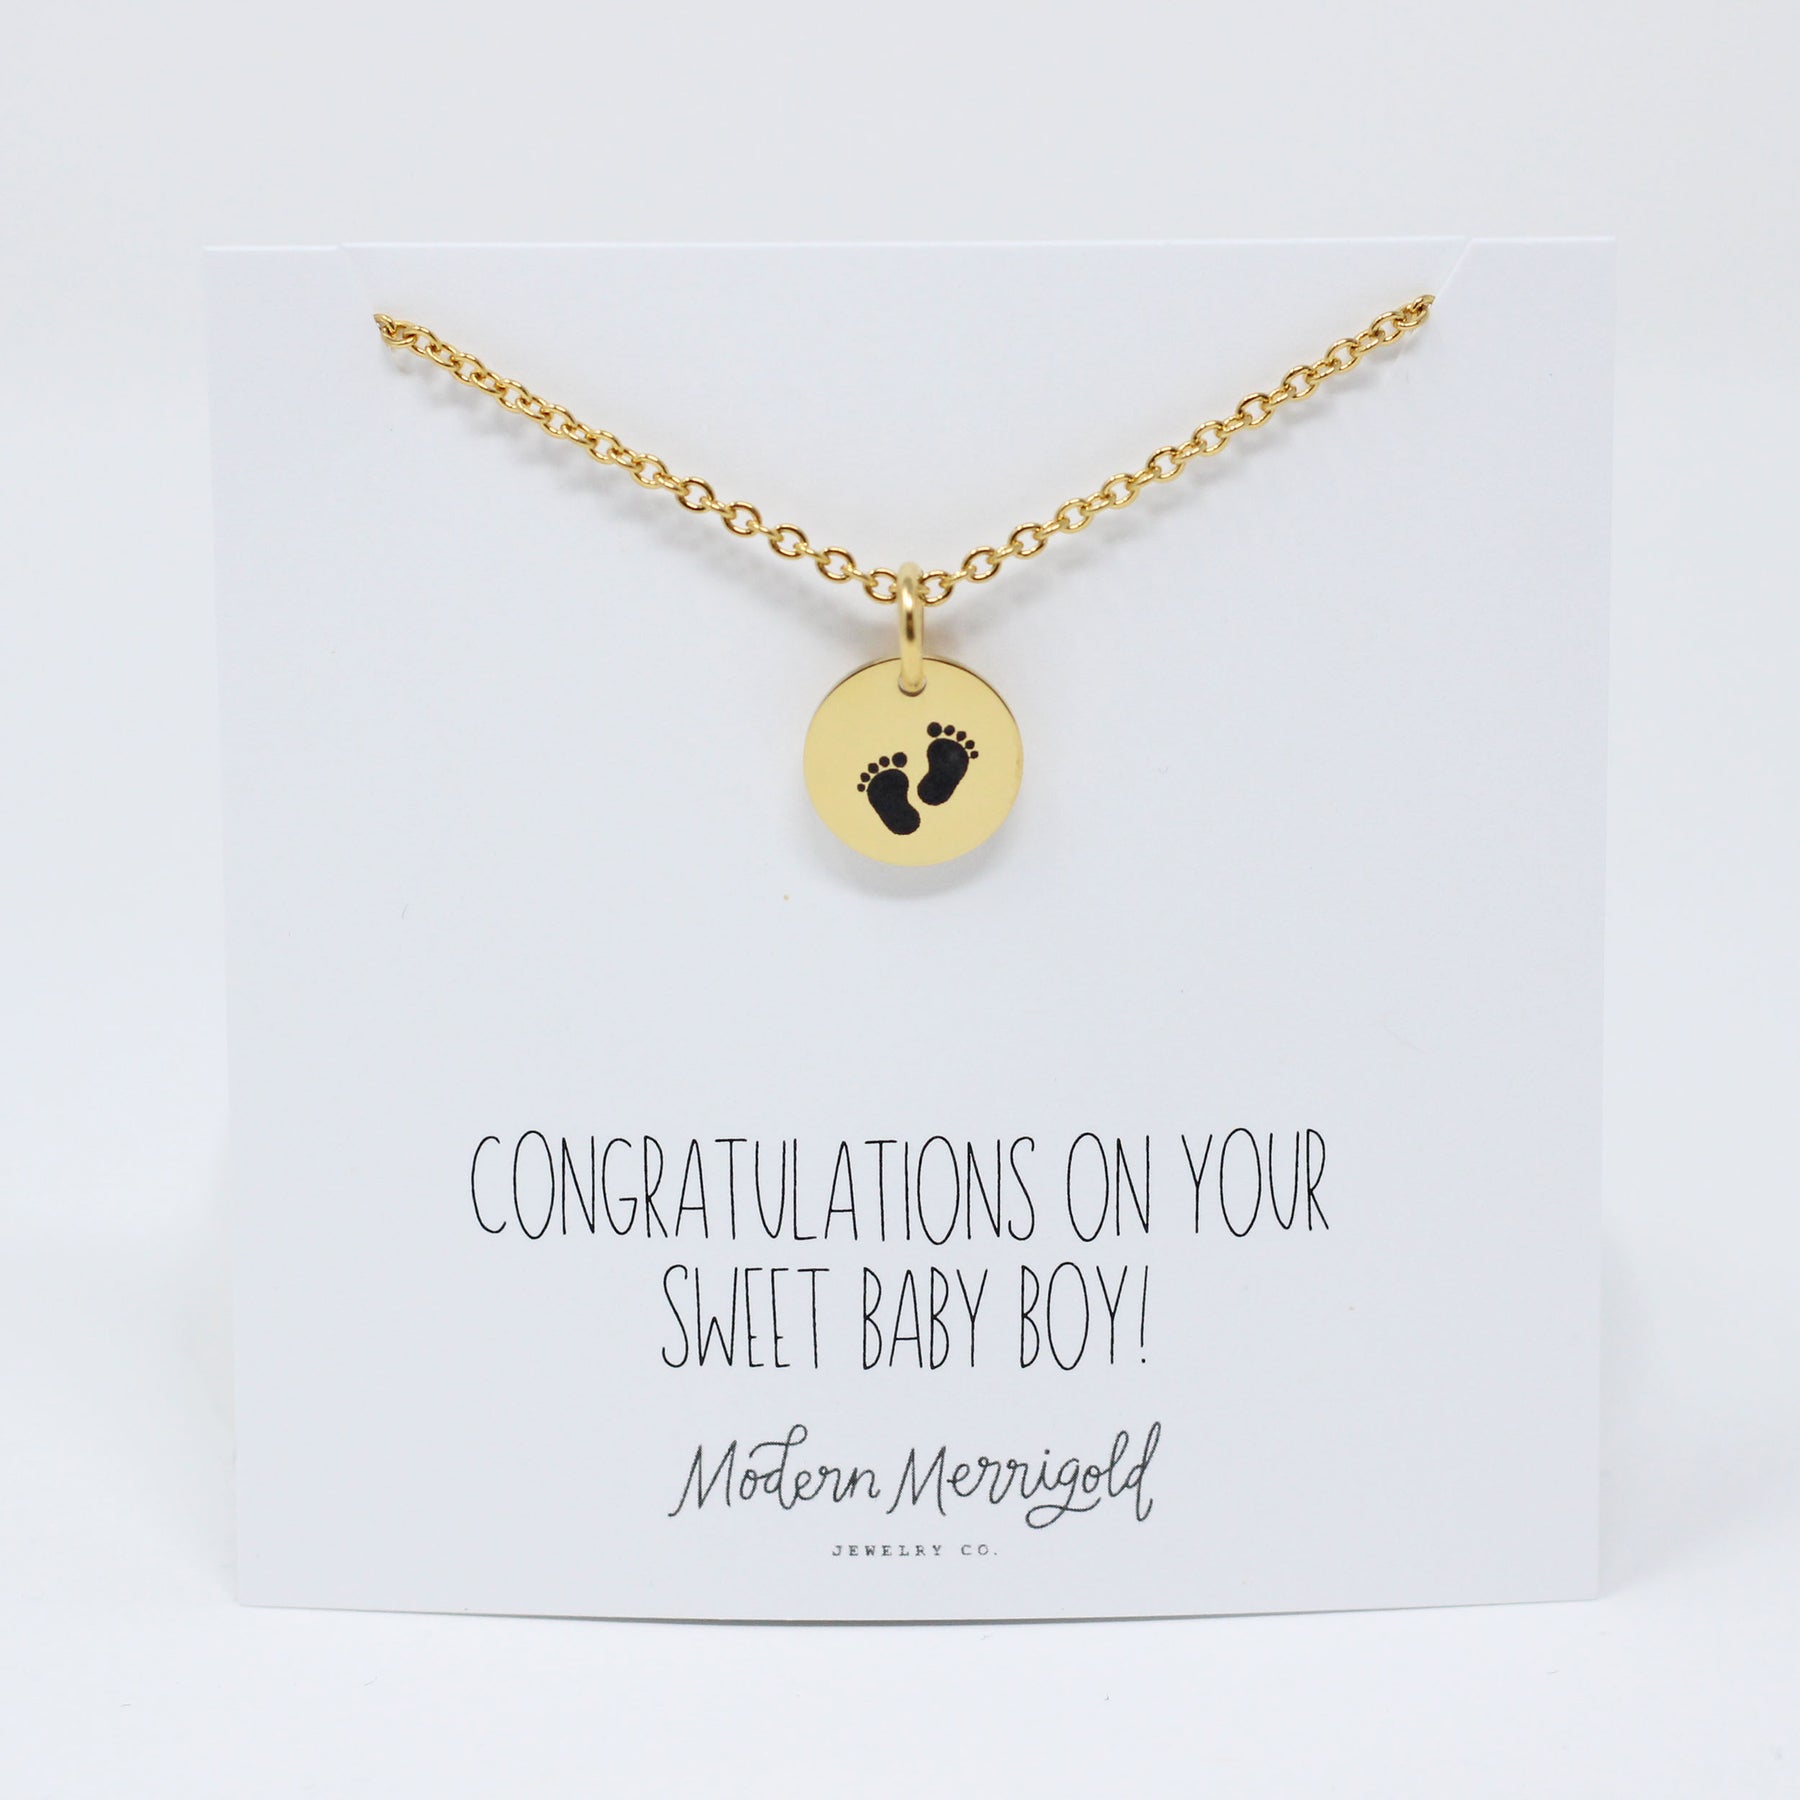 Lovely Store Message Card Jewelry - Personalized Gifts, It's a Boy necklace  Gift for mom | Baby